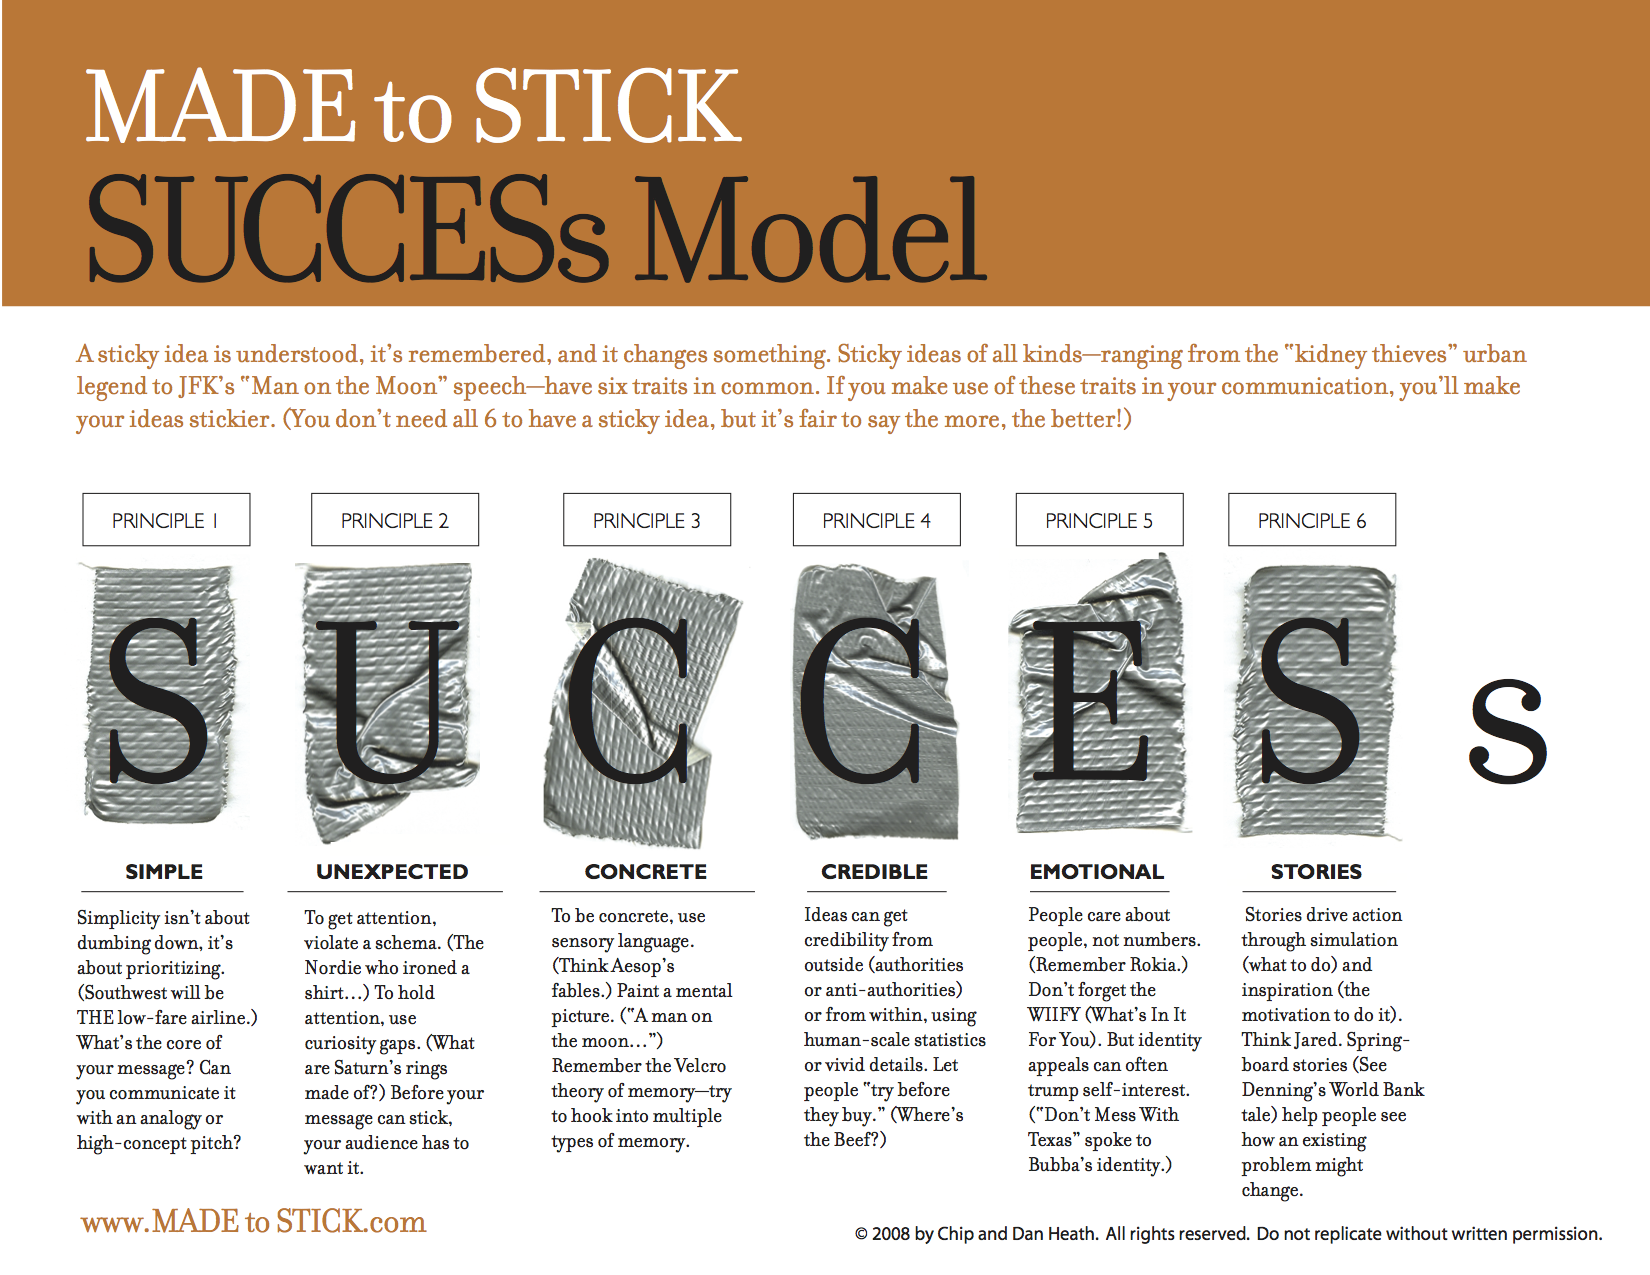 mts-made-to-stick-model